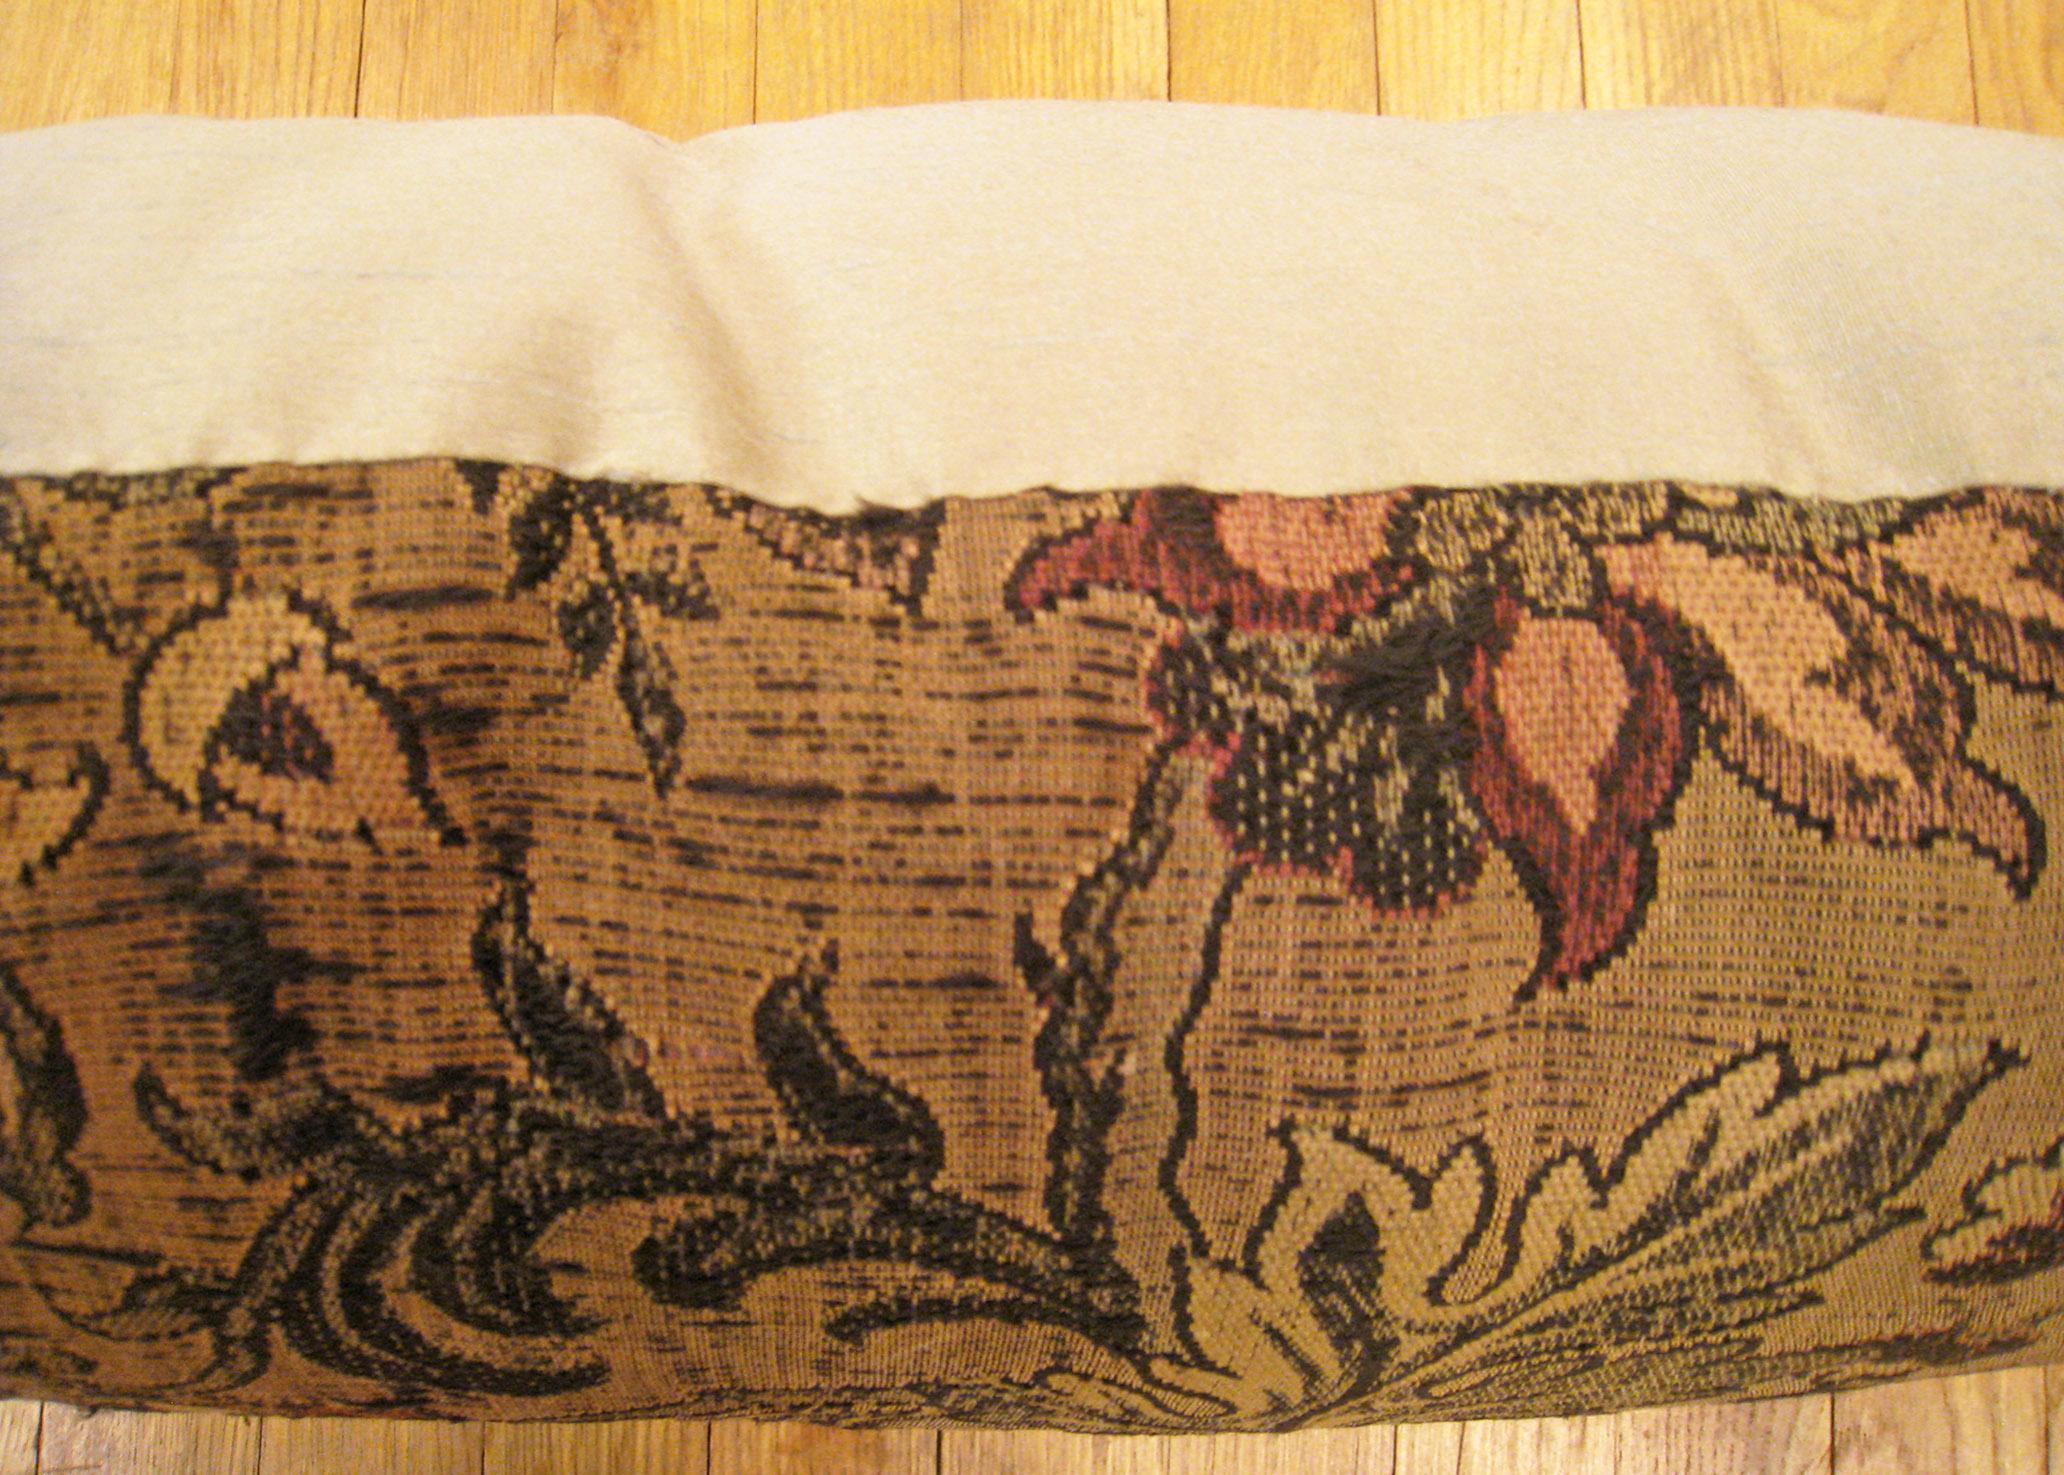 Early 20th Century Pair of Decorative Antique Jacquard Tapestry Pillows with Floral Elements For Sale